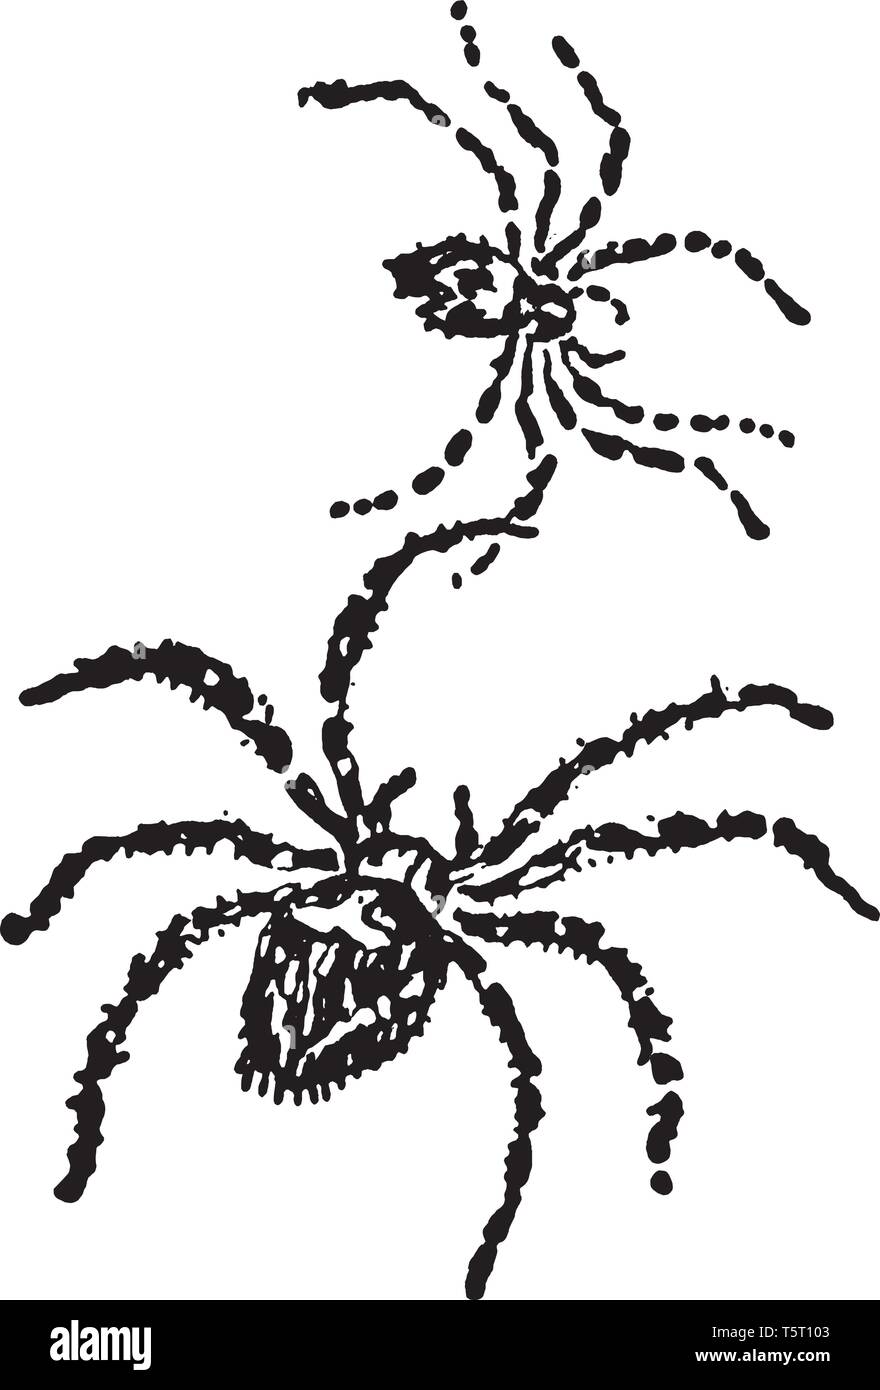 Spiders are air breathing arthropods that have eight legs and chelicerae with fangs that inject venom, vintage line drawing or engraving illustration. Stock Vector